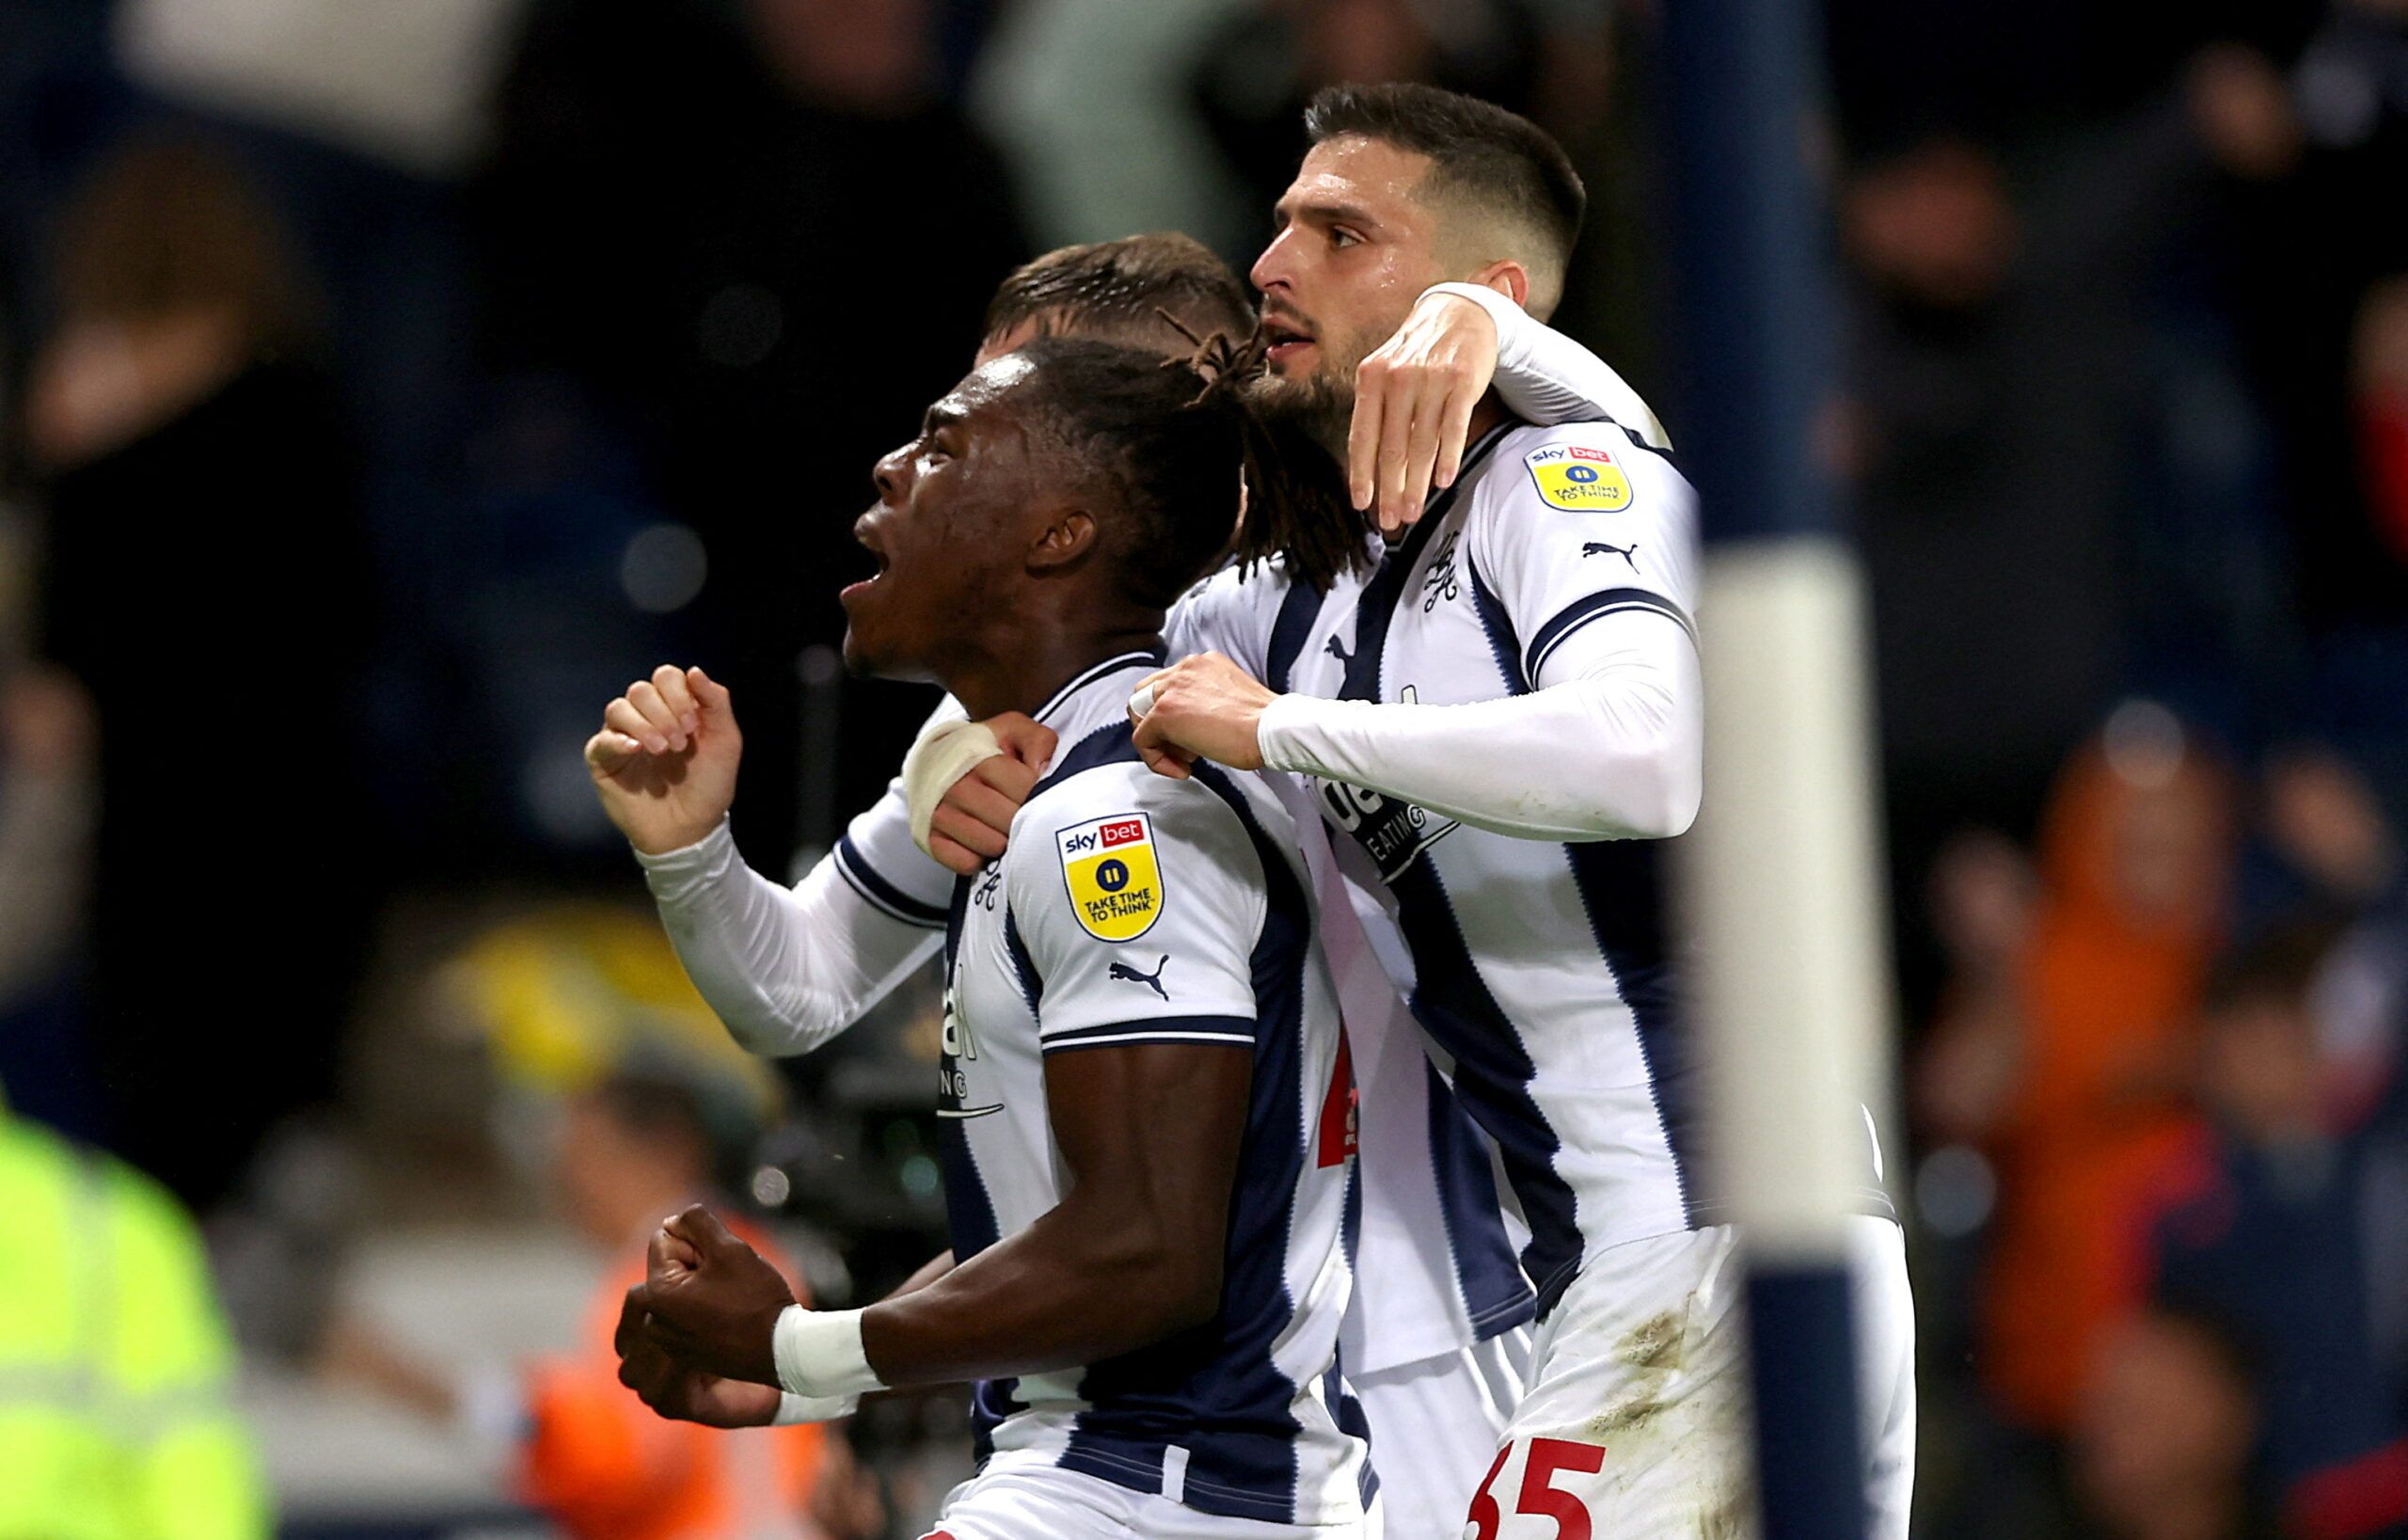 Soccer Football - Championship - West Bromwich Albion v Burnley - The Hawthorns, West Bromwich, Britain - September 2, 2022 West Bromwich Albion's Brandon Thomas Asante celebrates scoring their first goal  Action Images/Matthew Childs  EDITORIAL USE ONLY. No use with unauthorized audio, video, data, fixture lists, club/league logos or 